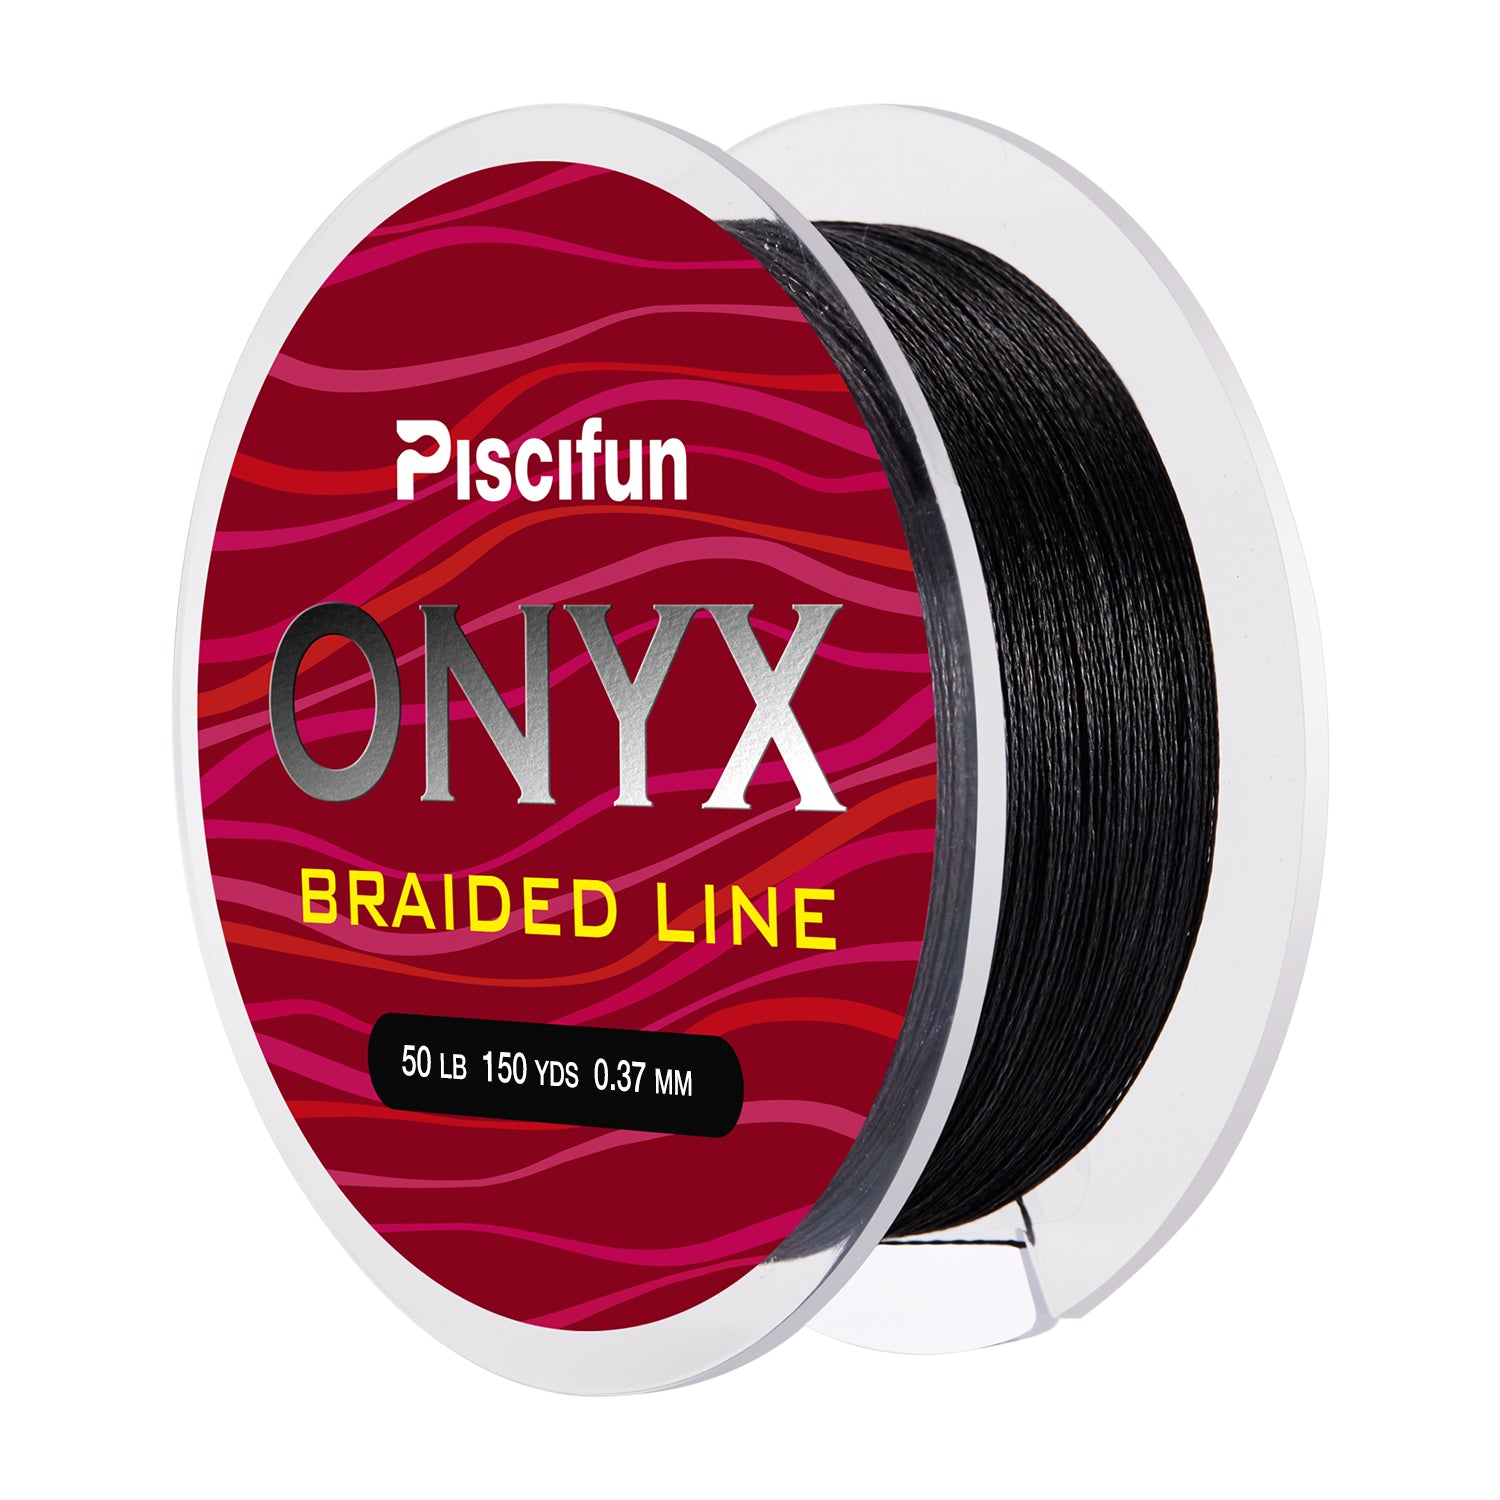 Piscifun Onyx Braided Fishing Line 6lb-150lb Superline Abrasion Resistant  Braided Lines Super Strong High Performance PE Fishing Lines